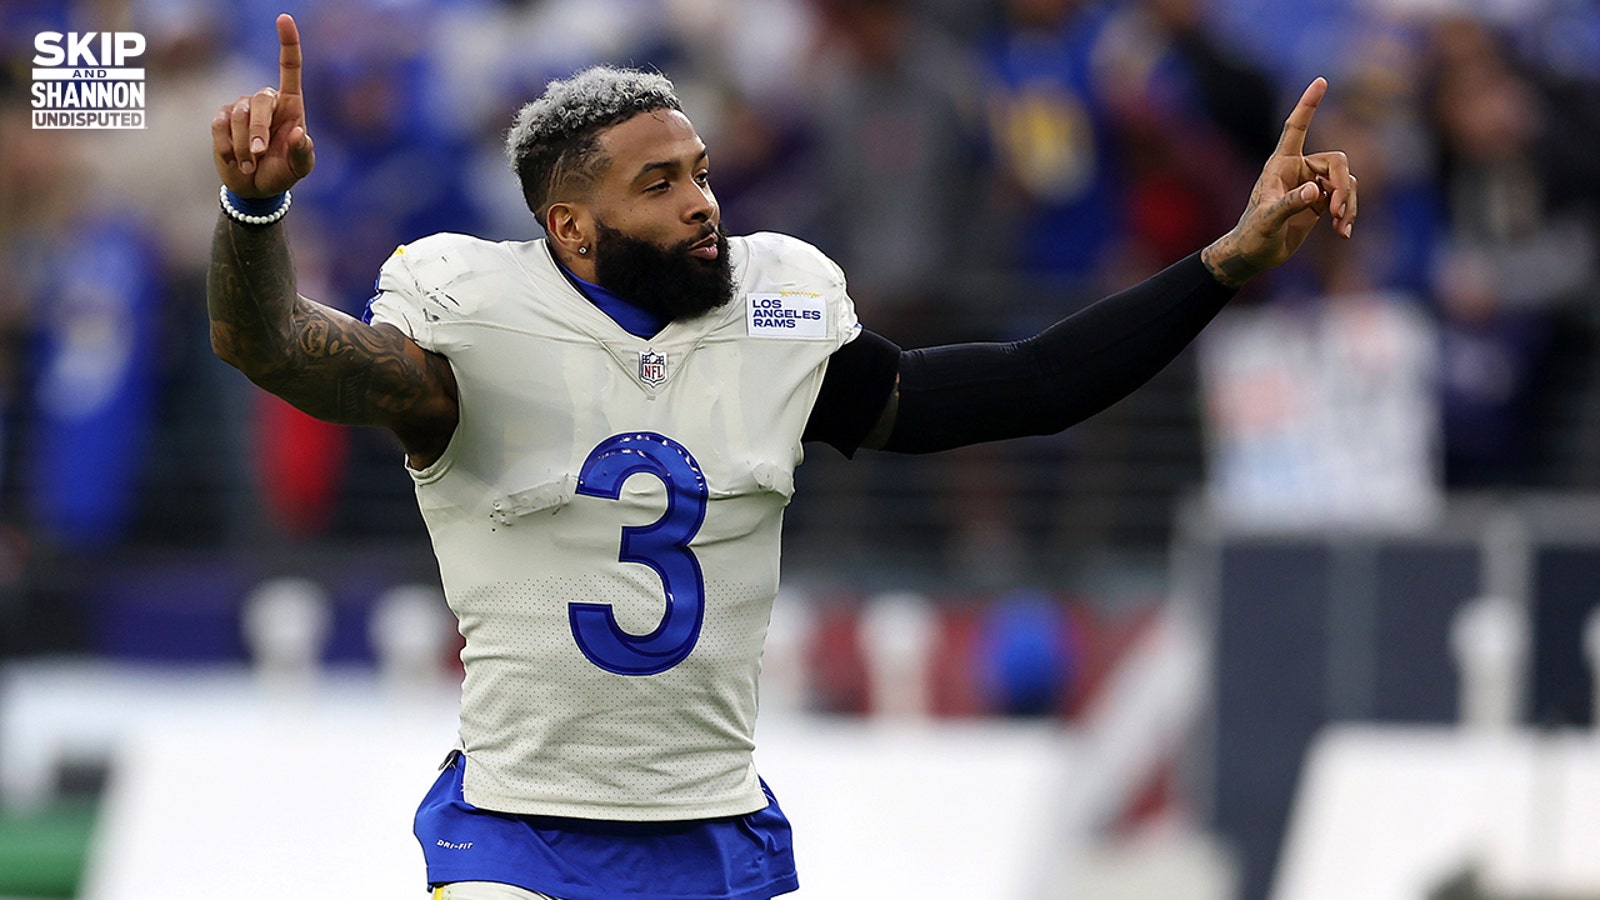 Odell Beckham Jr. to Cowboys rumors swirl after exchange with Micah Parsons 